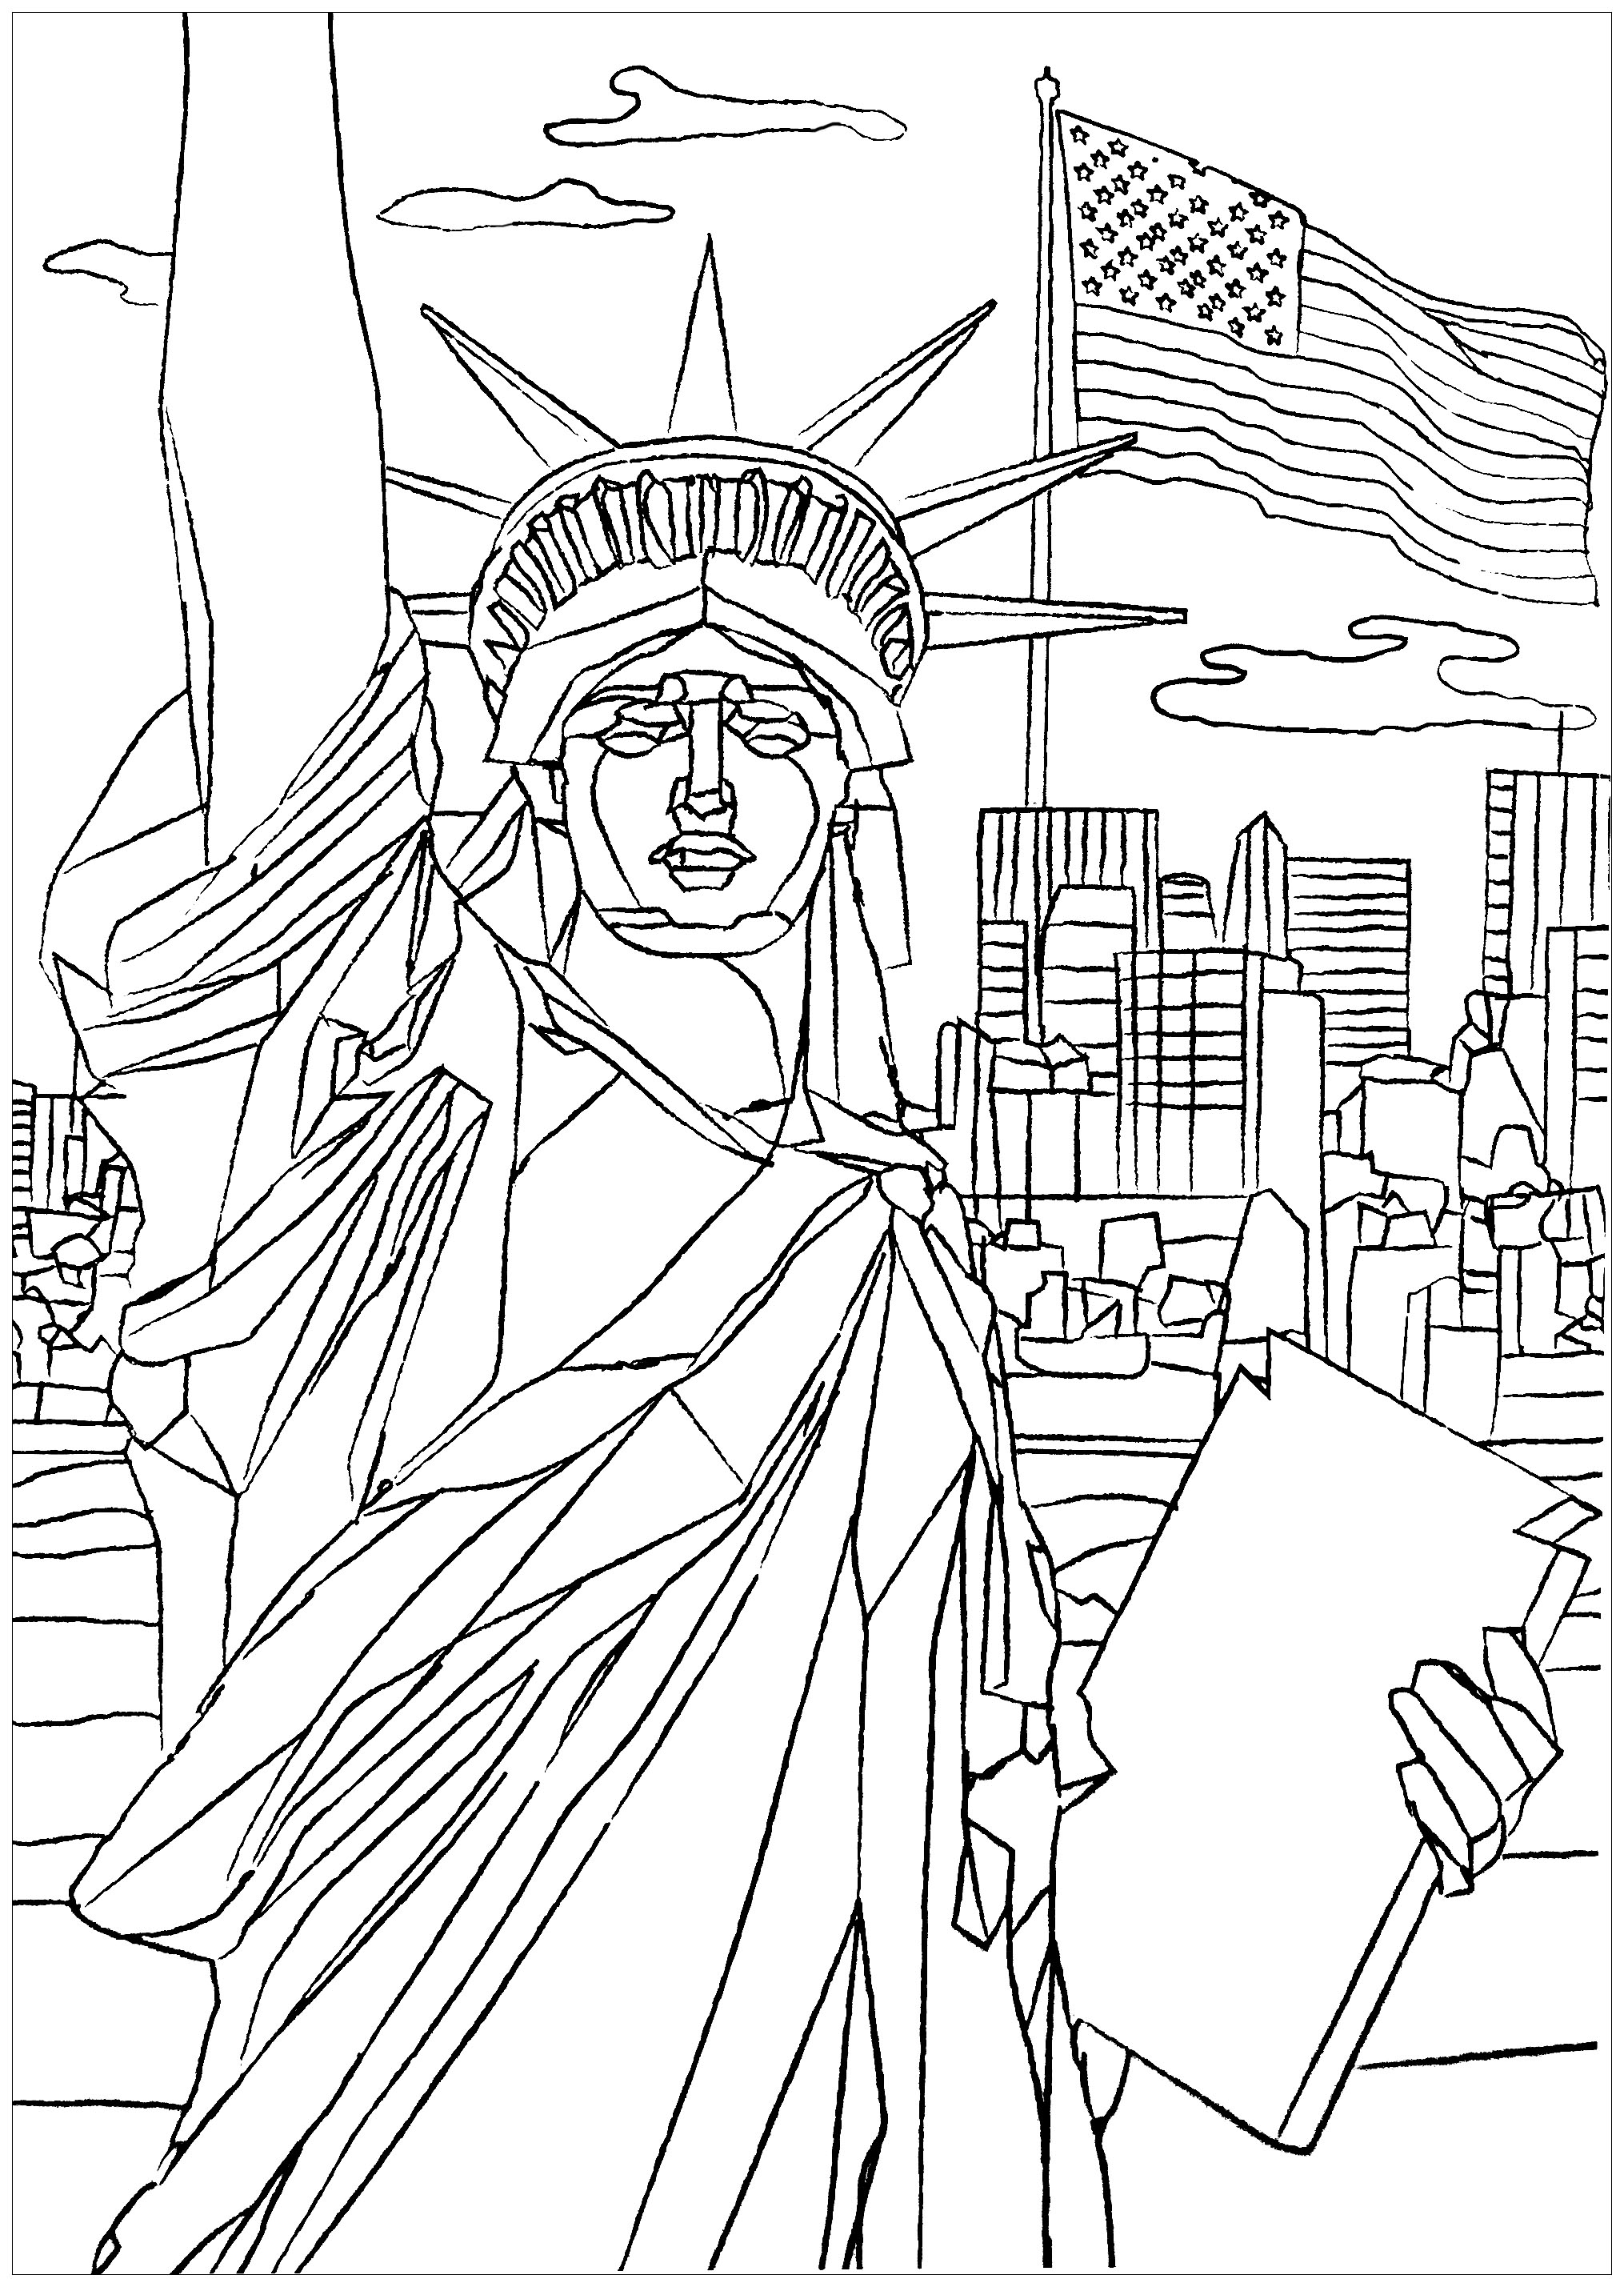 'The Statue of Liberty Enlightening the World' was a gift of friendship from the people of France to the United States. Color 'Miss Liberty' and the skyscrapers of the tip of Manhattan